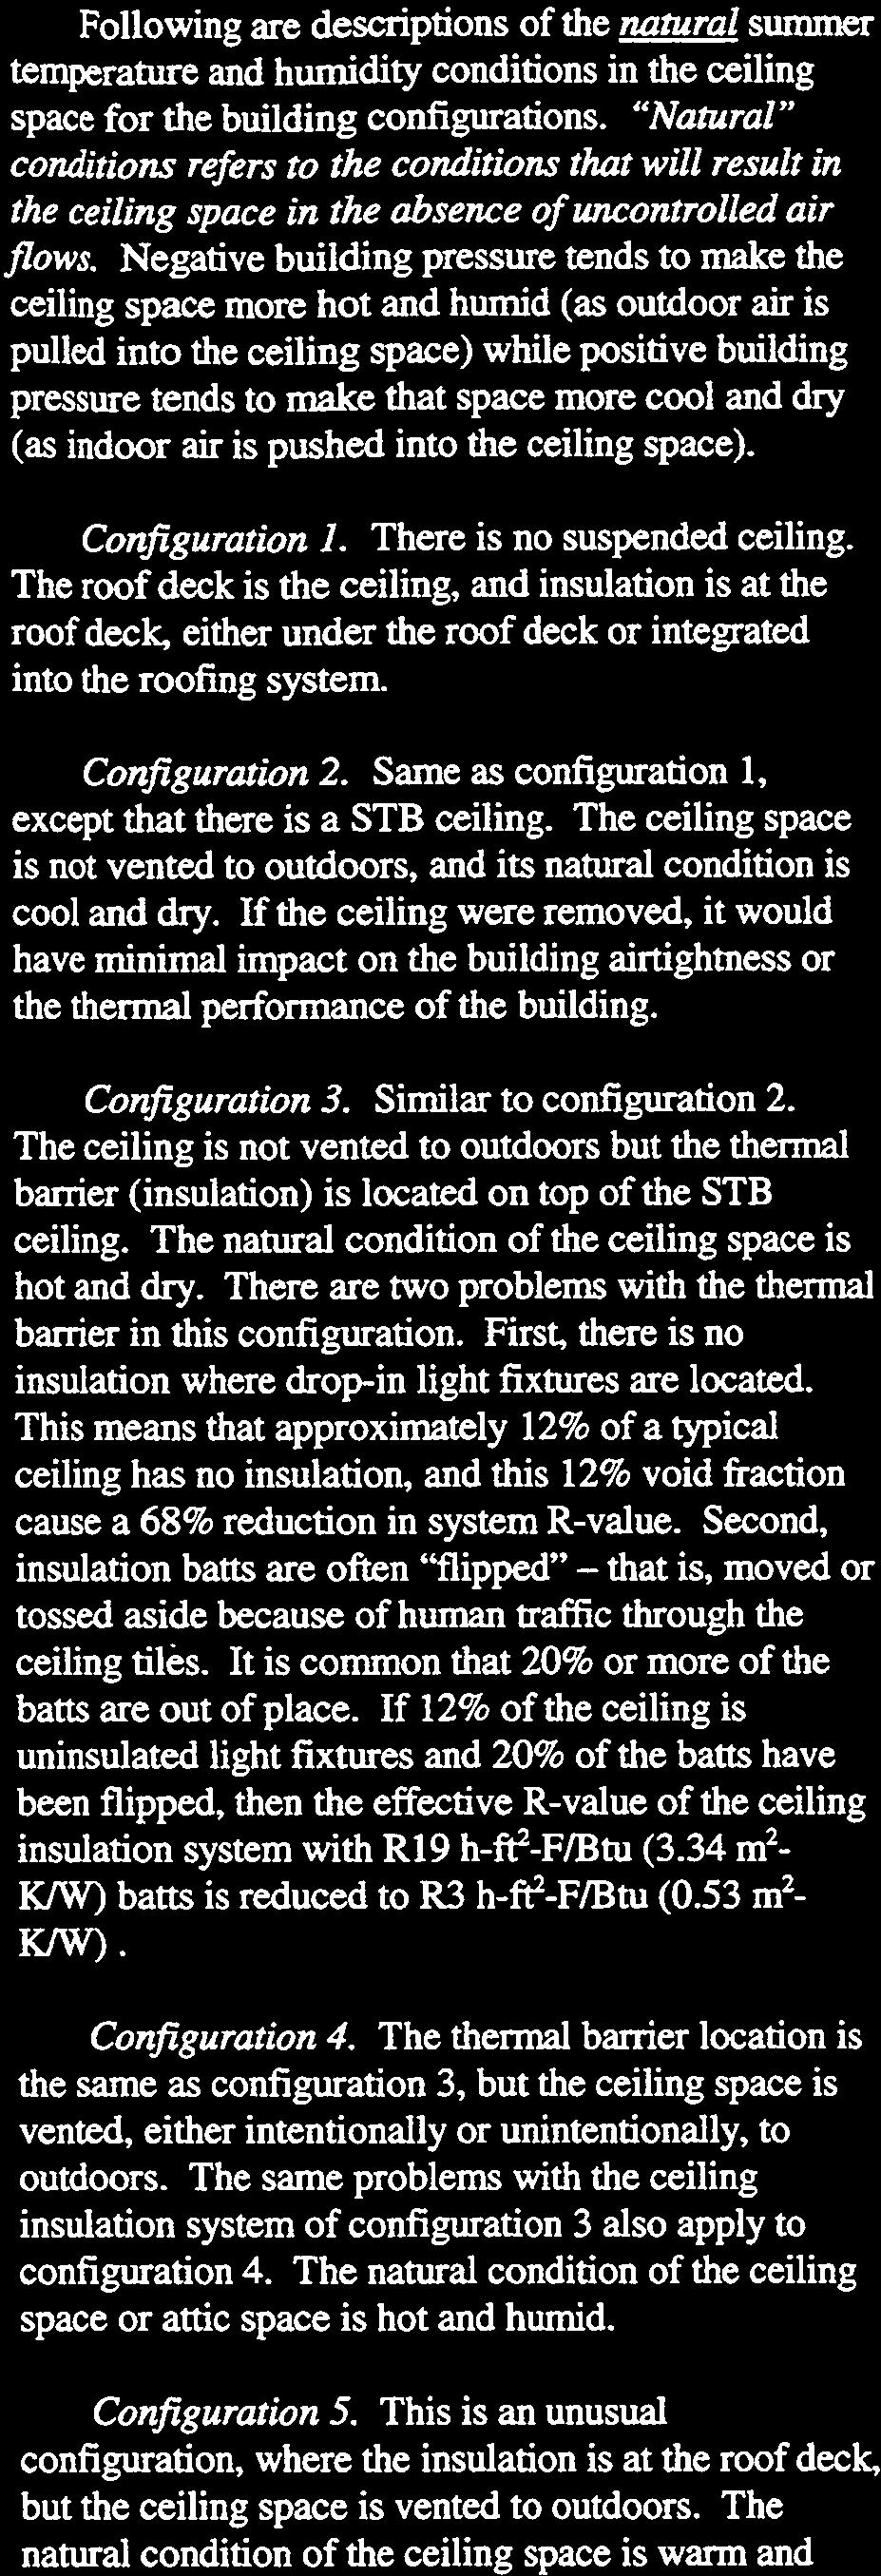 Following are descriptions of the natural summer temperature and humidity conditions in the ceiling space for the building configurations.